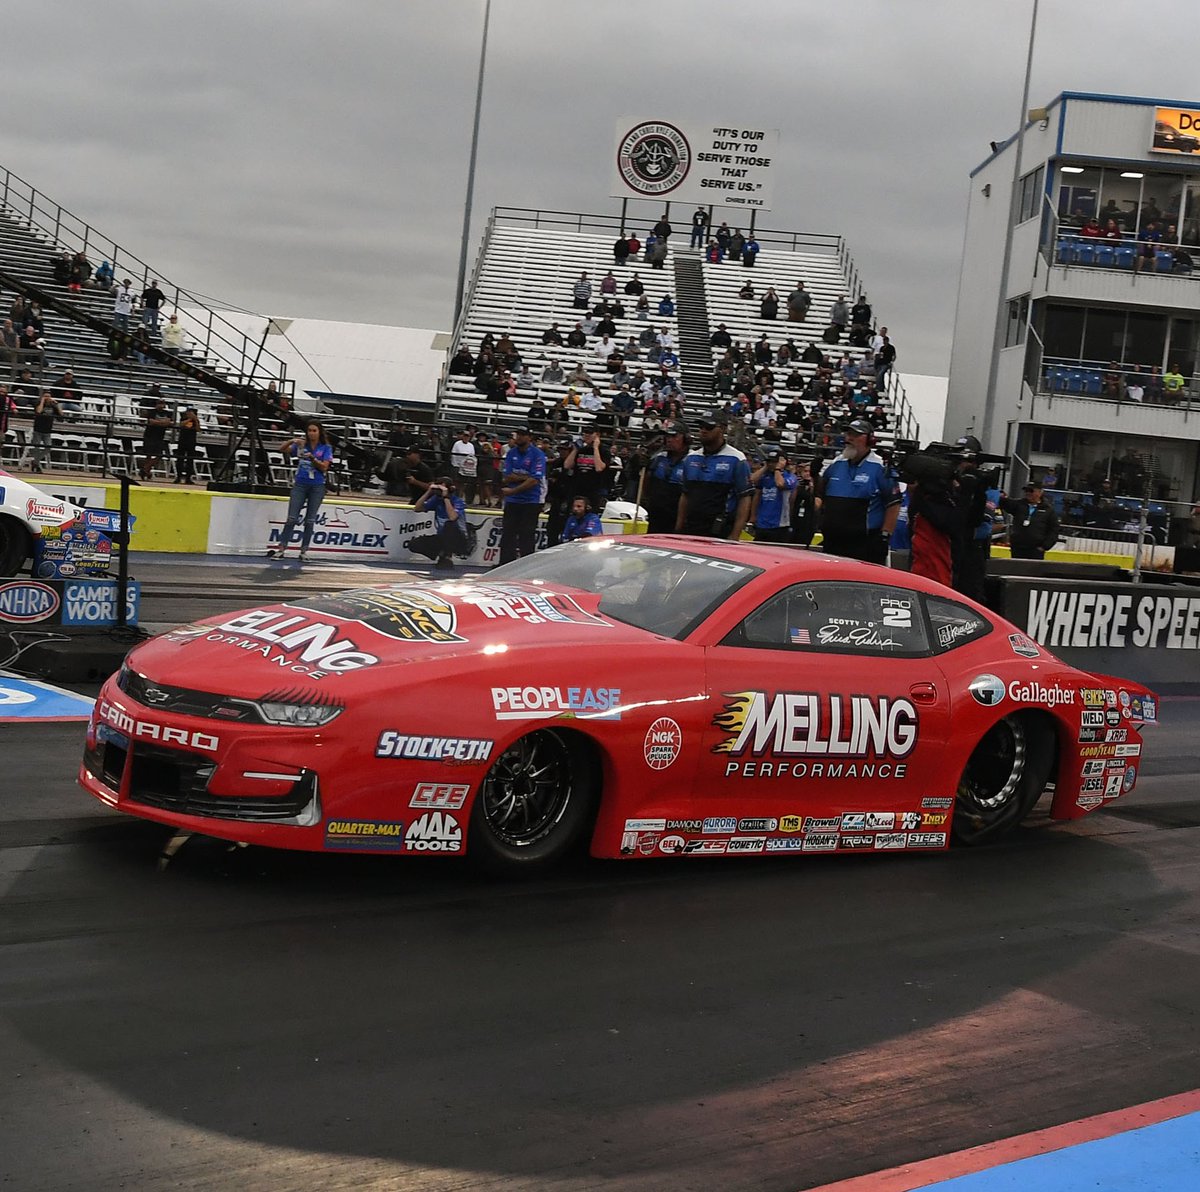 For the ninth time this year, Erica Enders takes home the Wally in @ProStock @NHRA AAA #TexasFallNationals @txmplex Congratulations, Erica!